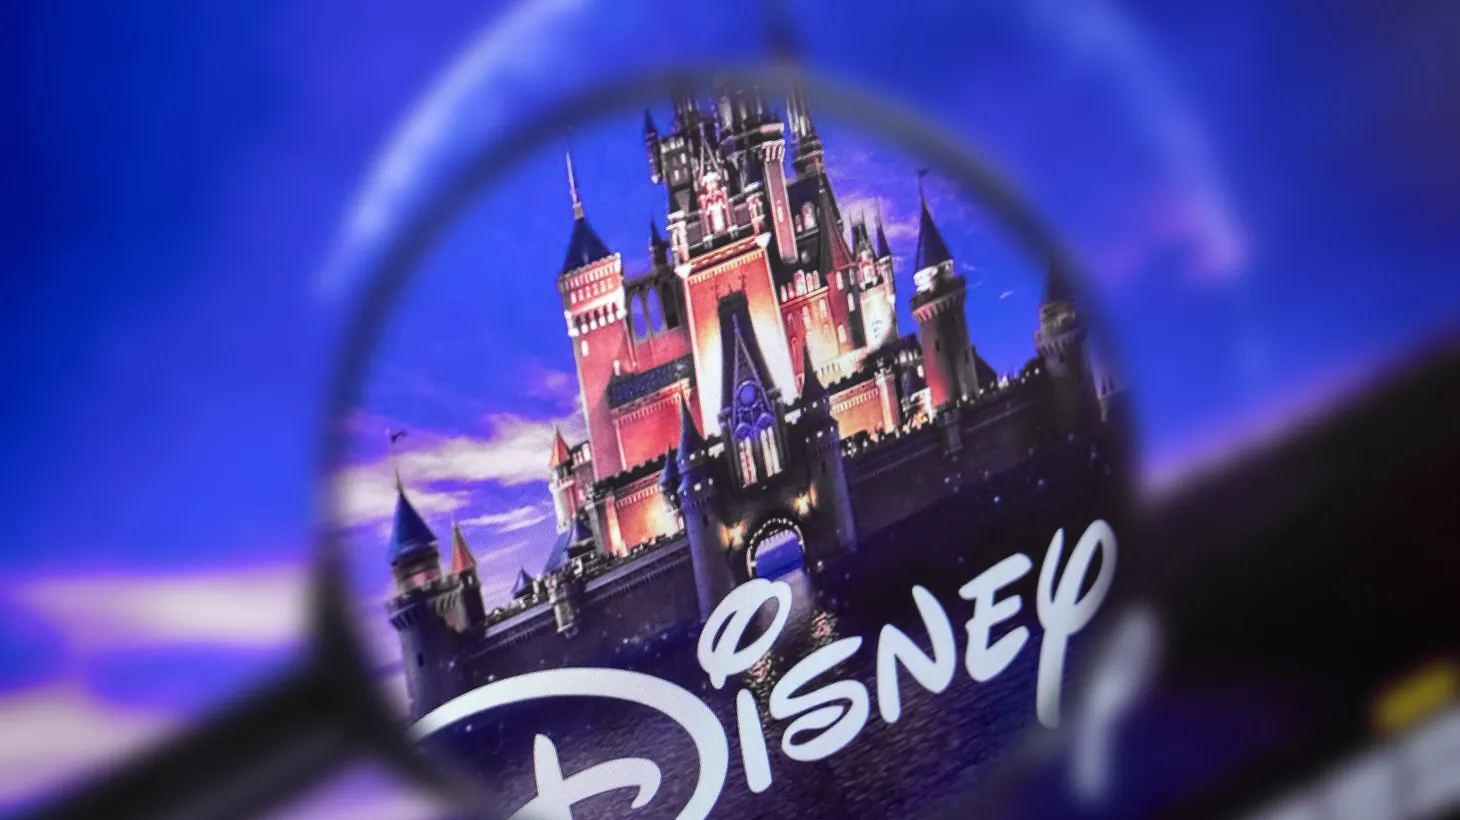 The home page of the Walt Disney Co. website viewed through a magnifying glass.